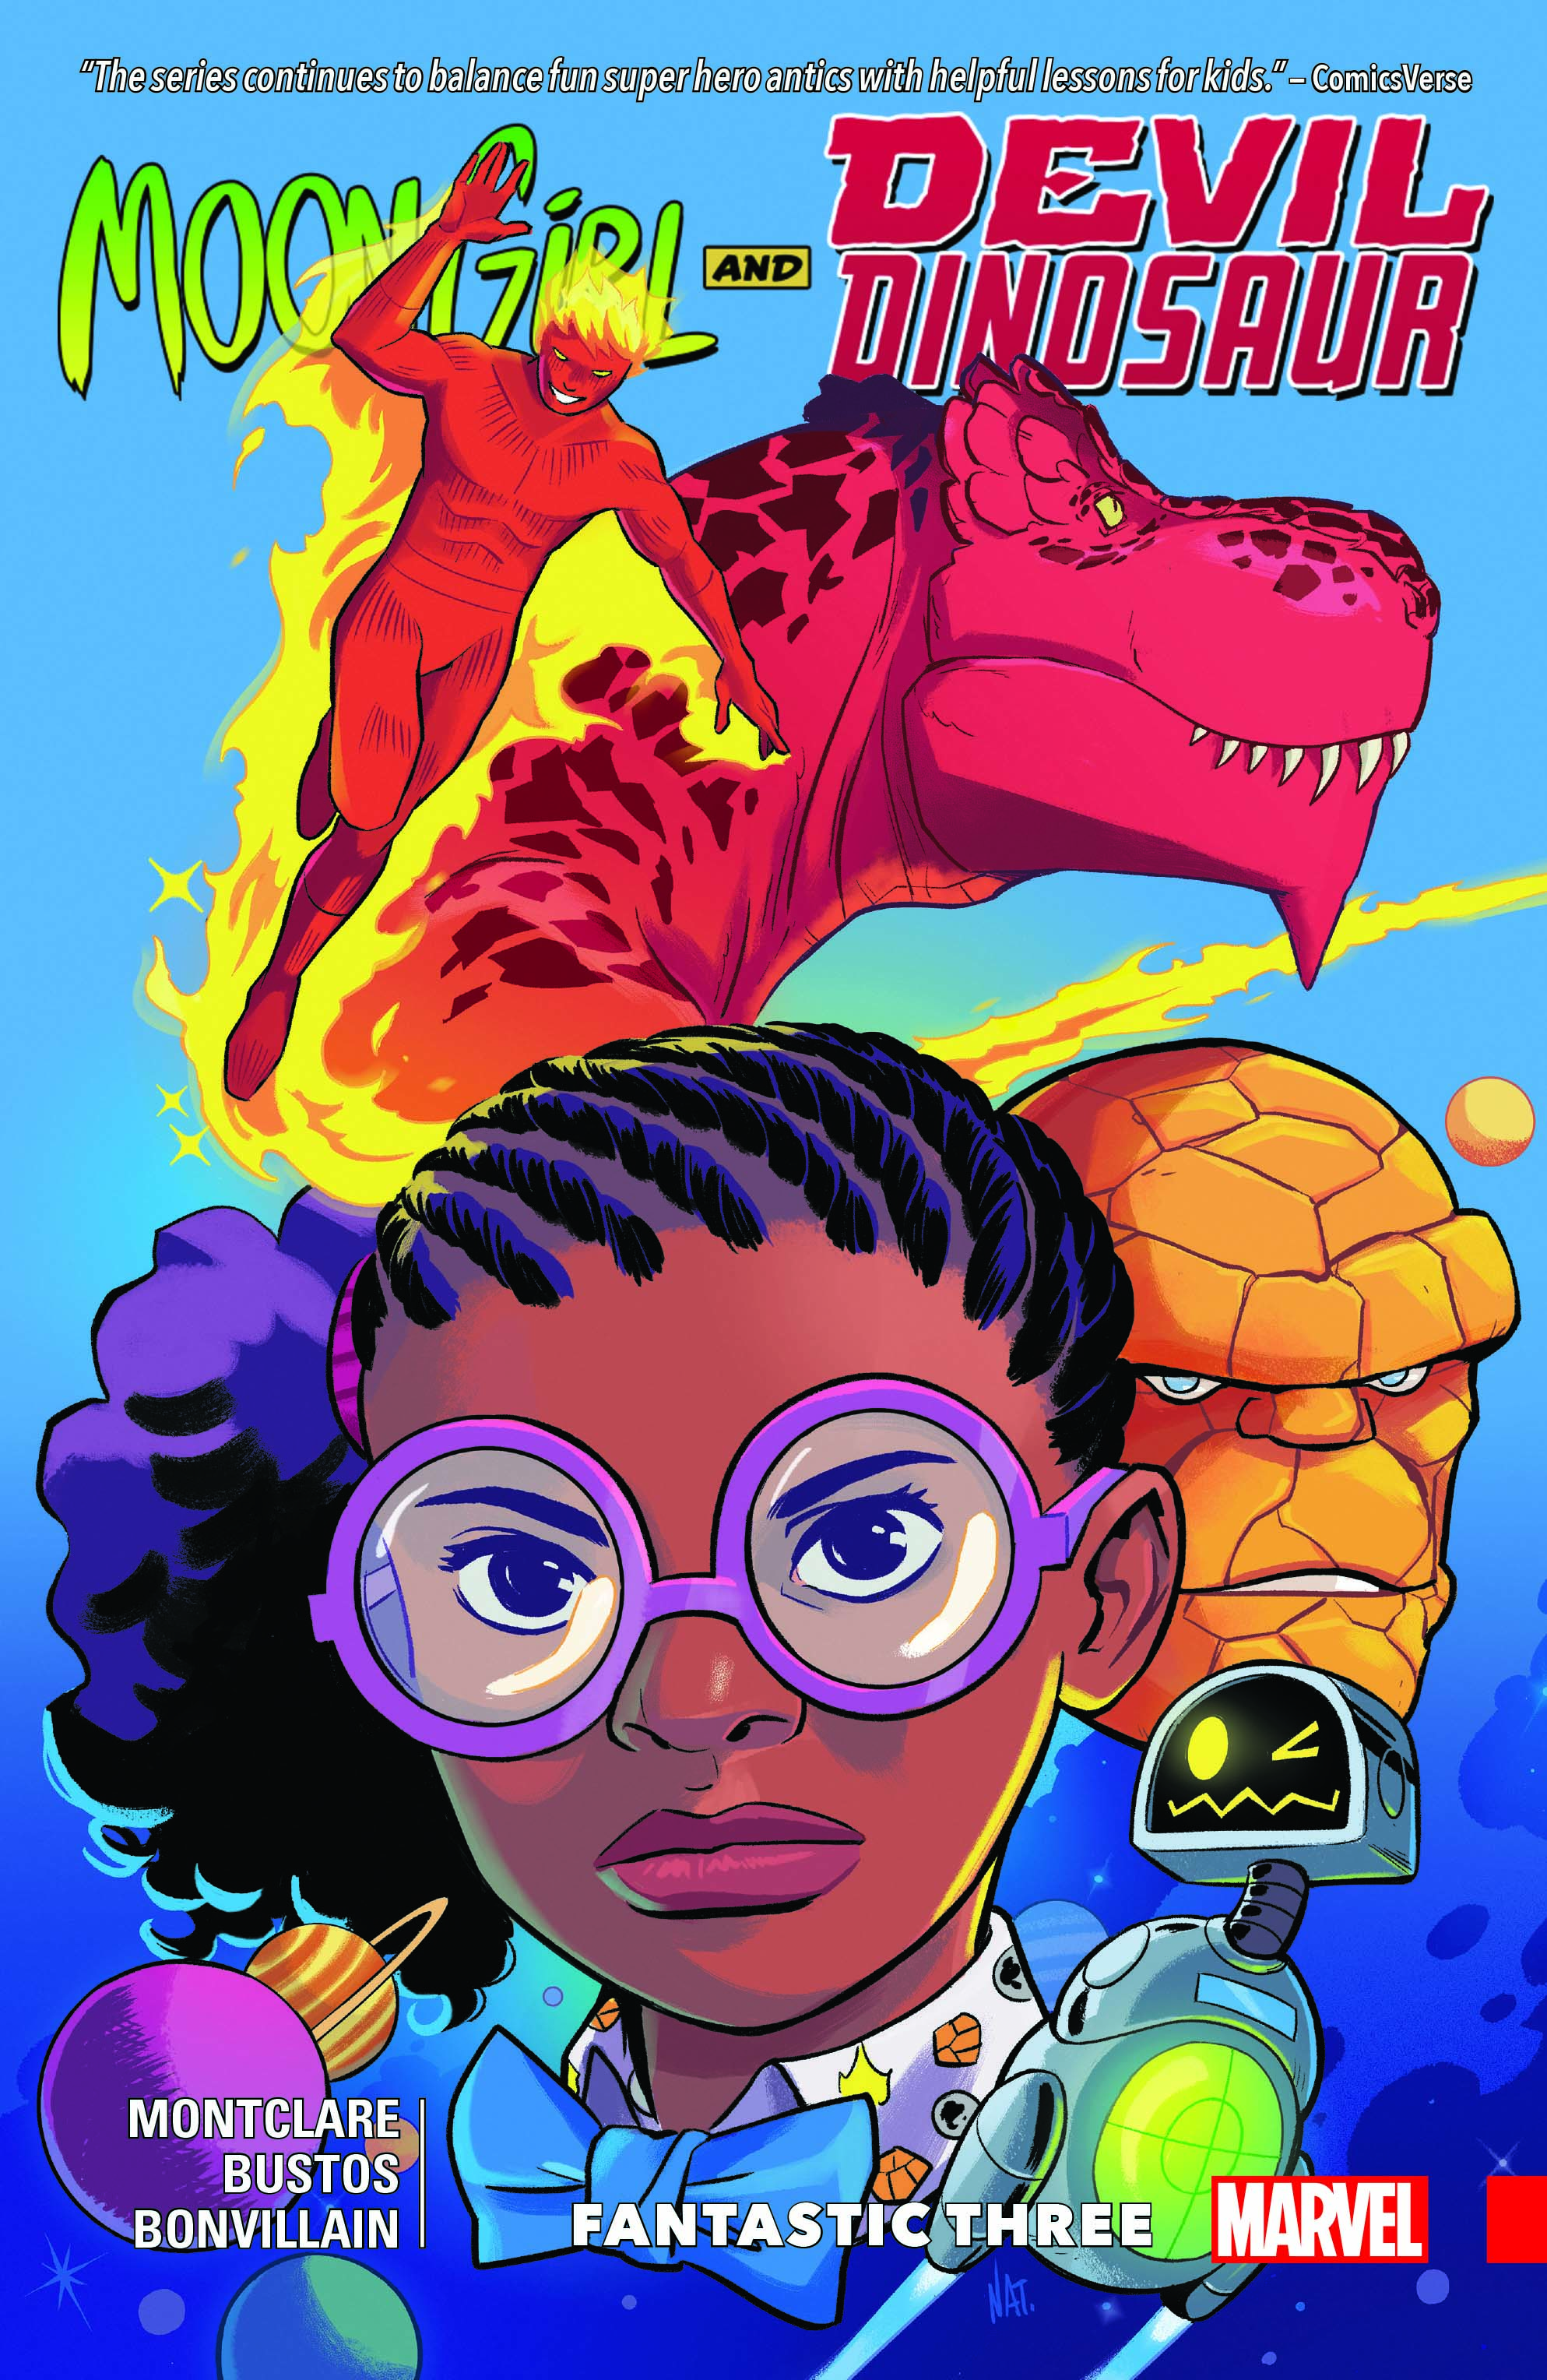 The cover of an issue of Moon Girl and Devil Dinosaur